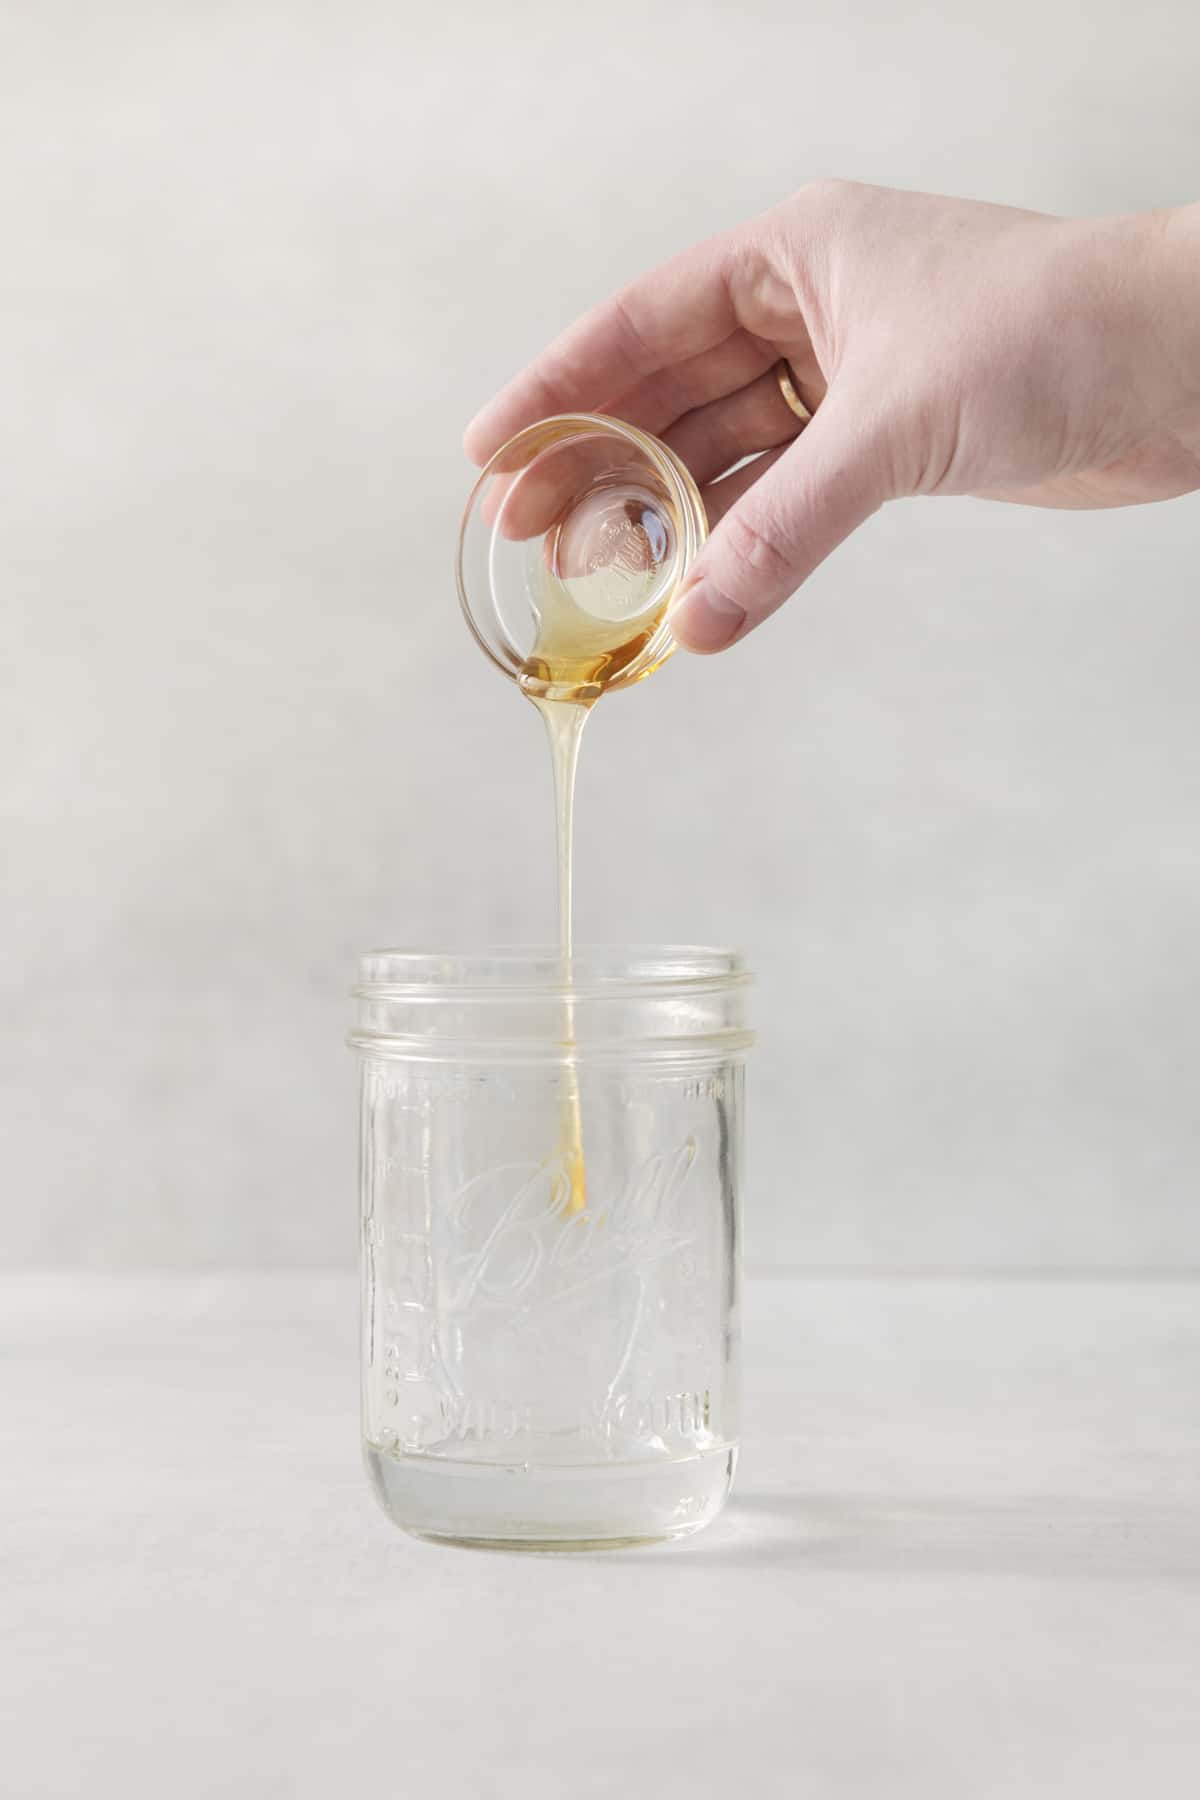 honey being added to a vodka cocktail.